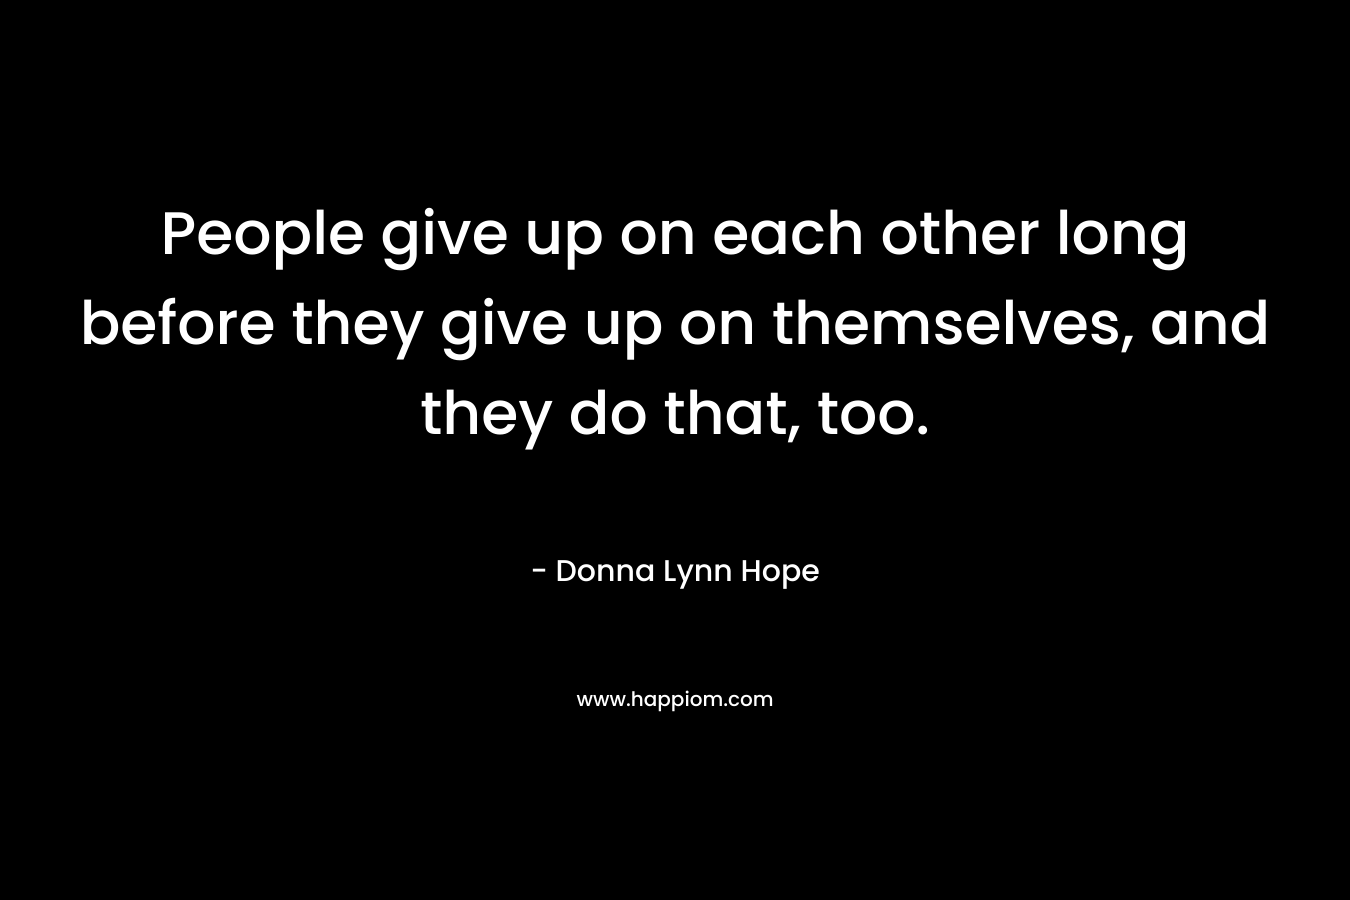 People give up on each other long before they give up on themselves, and they do that, too. – Donna Lynn Hope